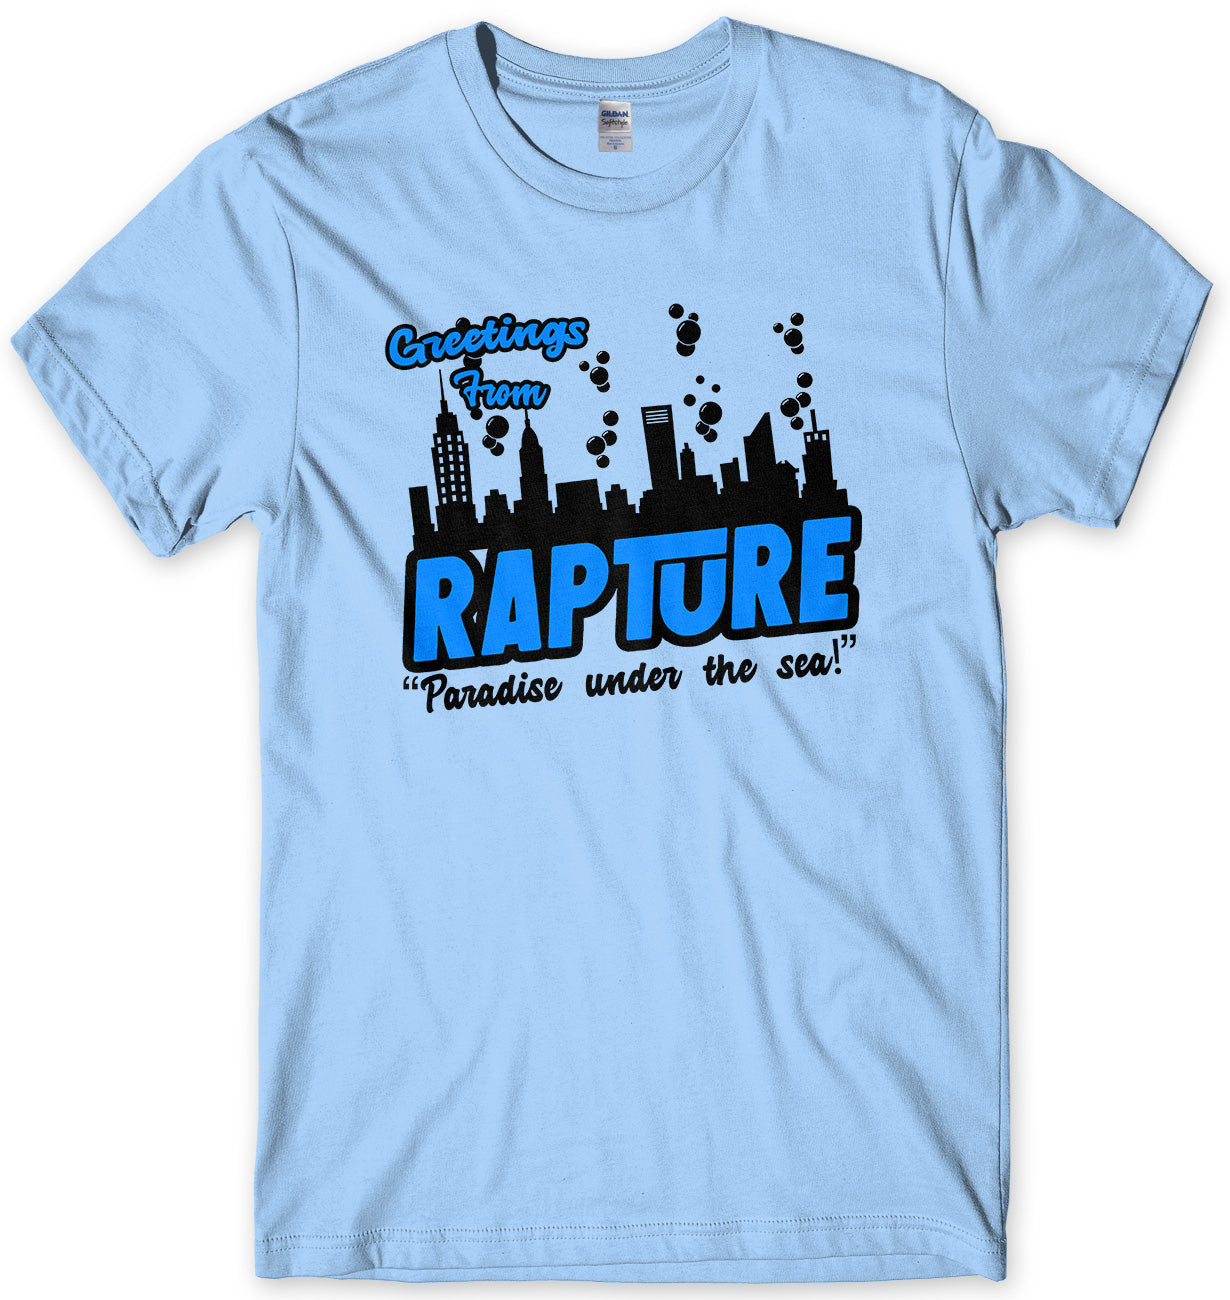 GREETINGS FROM RAPTURE MENS UNISEX T-SHIRT